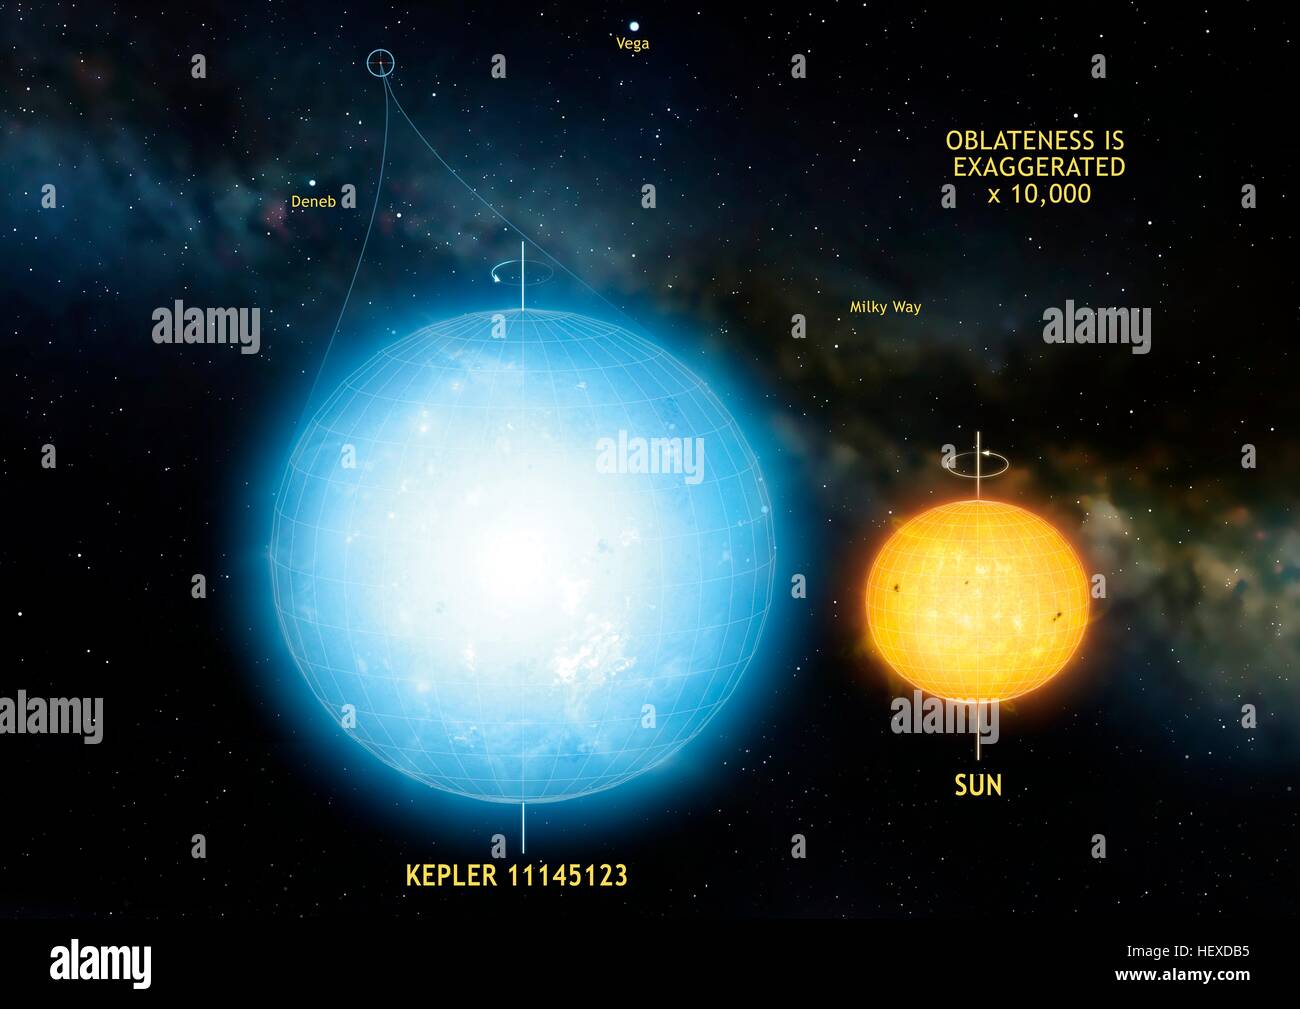 Kepler 11145123 is roundest known astronomical body.All astronomical bodies,including Earth Sun,are slightly oblate they bulge at equator because of their spin.However,Kepler 11145123 has such small degree of flattening that astronomers have concluded that it's closer to true sphere than any other Stock Photo